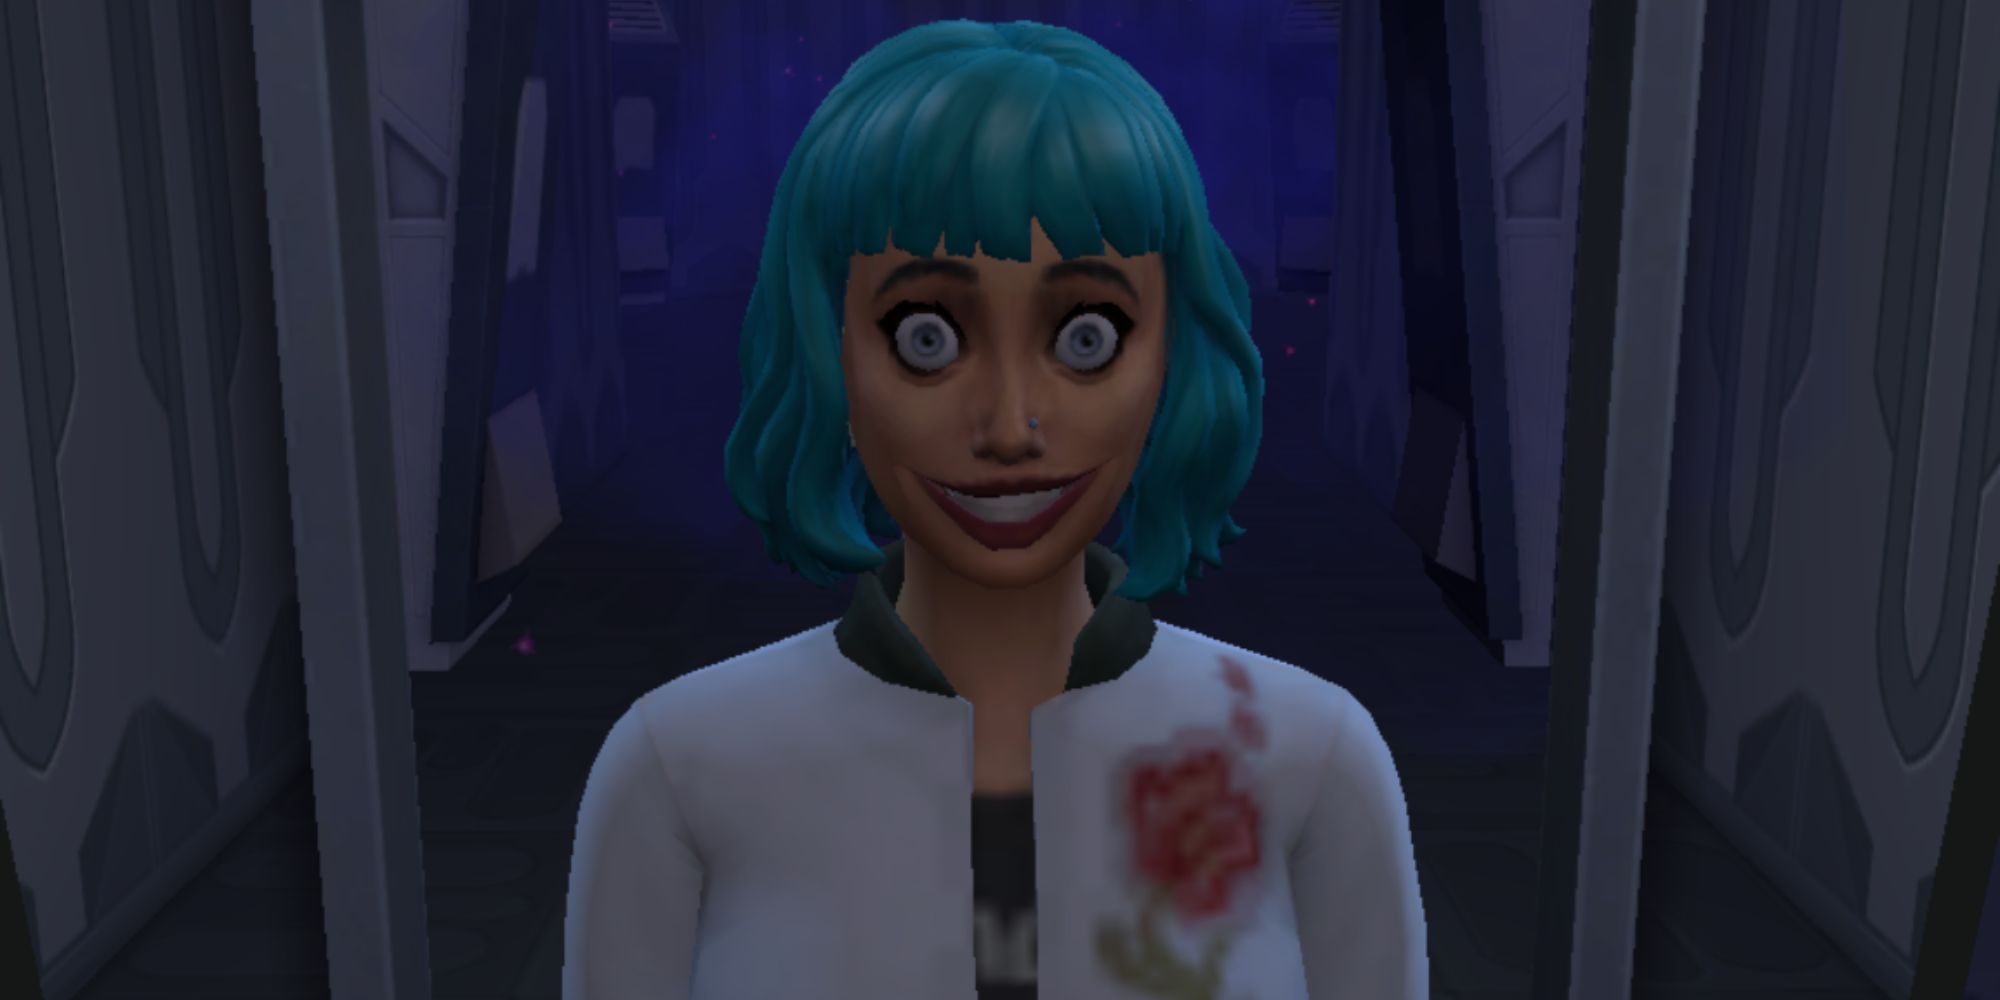 The Sims 4 Infected Sim